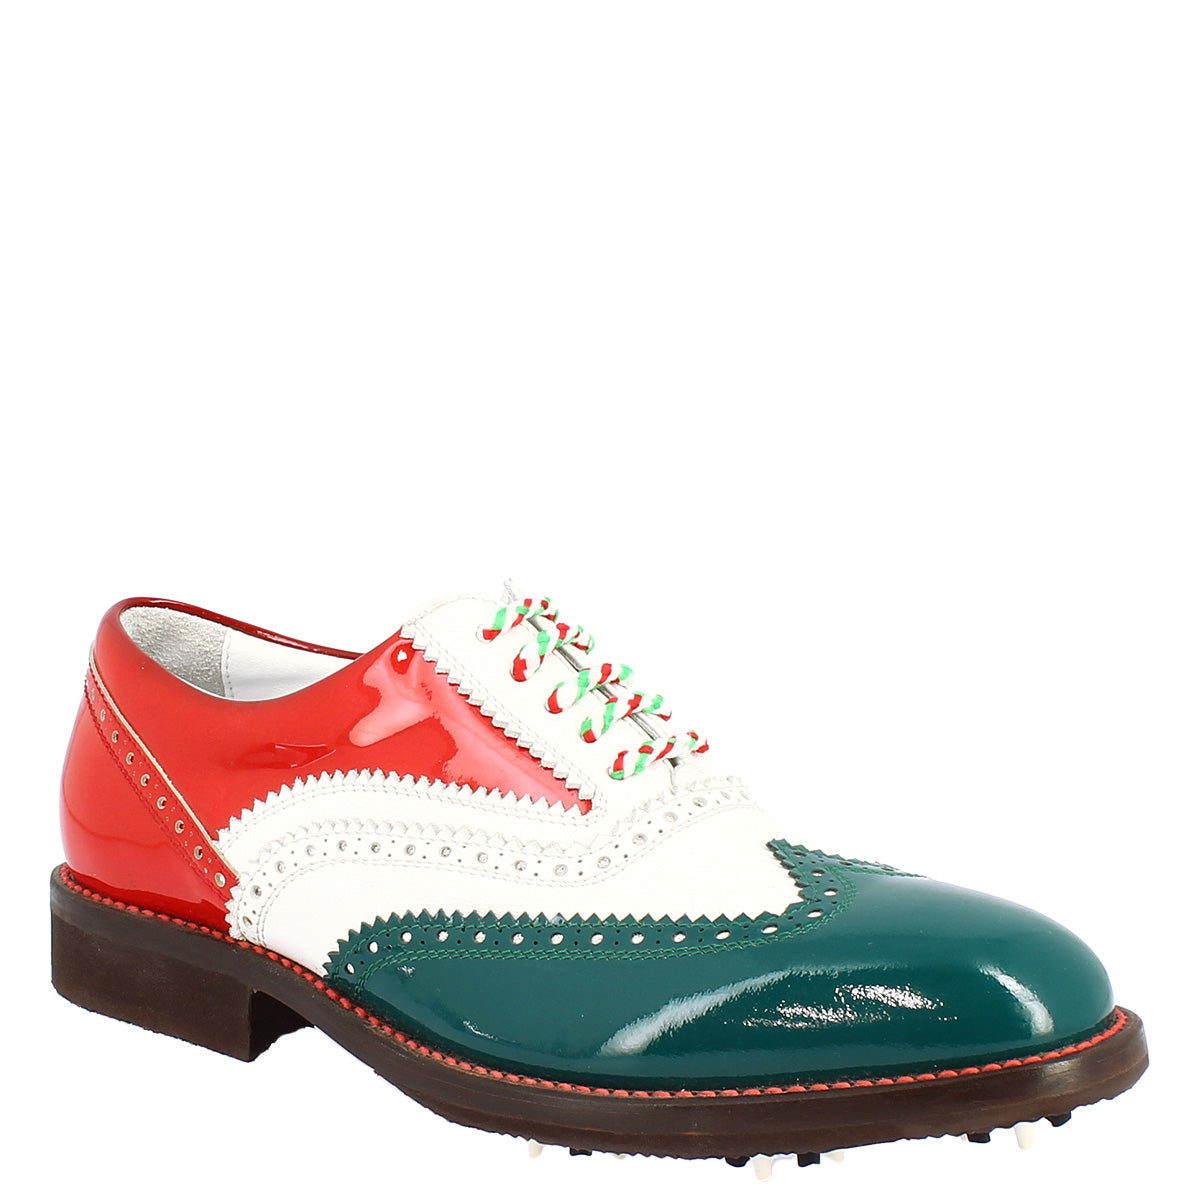 Handmade women's golf shoes in the colours of the Italian flag